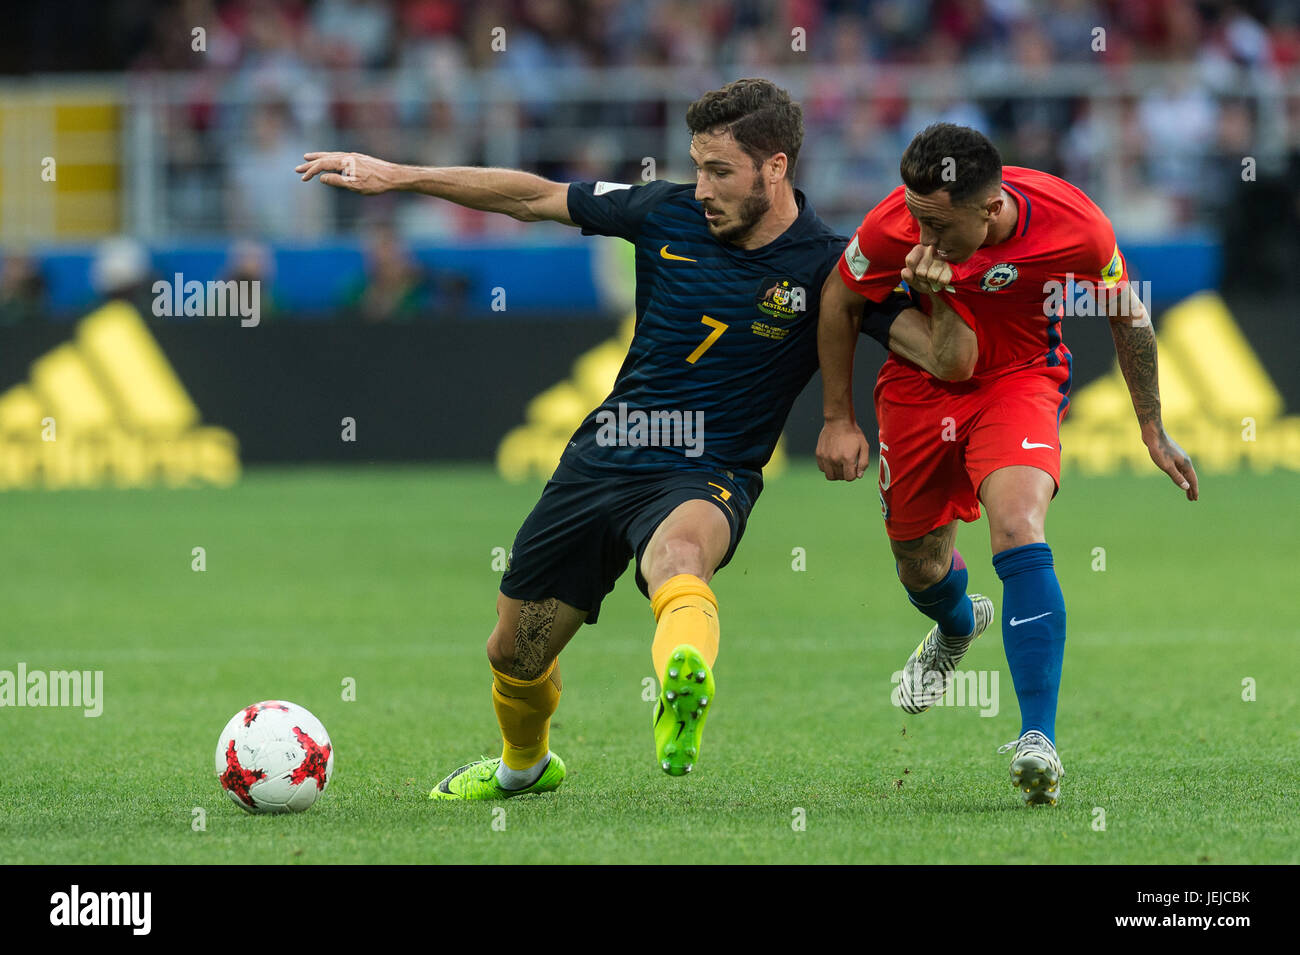 Moscow, Russia. 25th June, 2017. Mathew Leckie (L) of Australia vies for the ball with Jose Fuenzalida of Chile during the FIFA Confederations Cup 2017 football match in Moscow, Russia, June 25, 2017. Match ended 1-1. Credit: Evgeny Sinitsyn/Xinhua/Alamy Live News Stock Photo